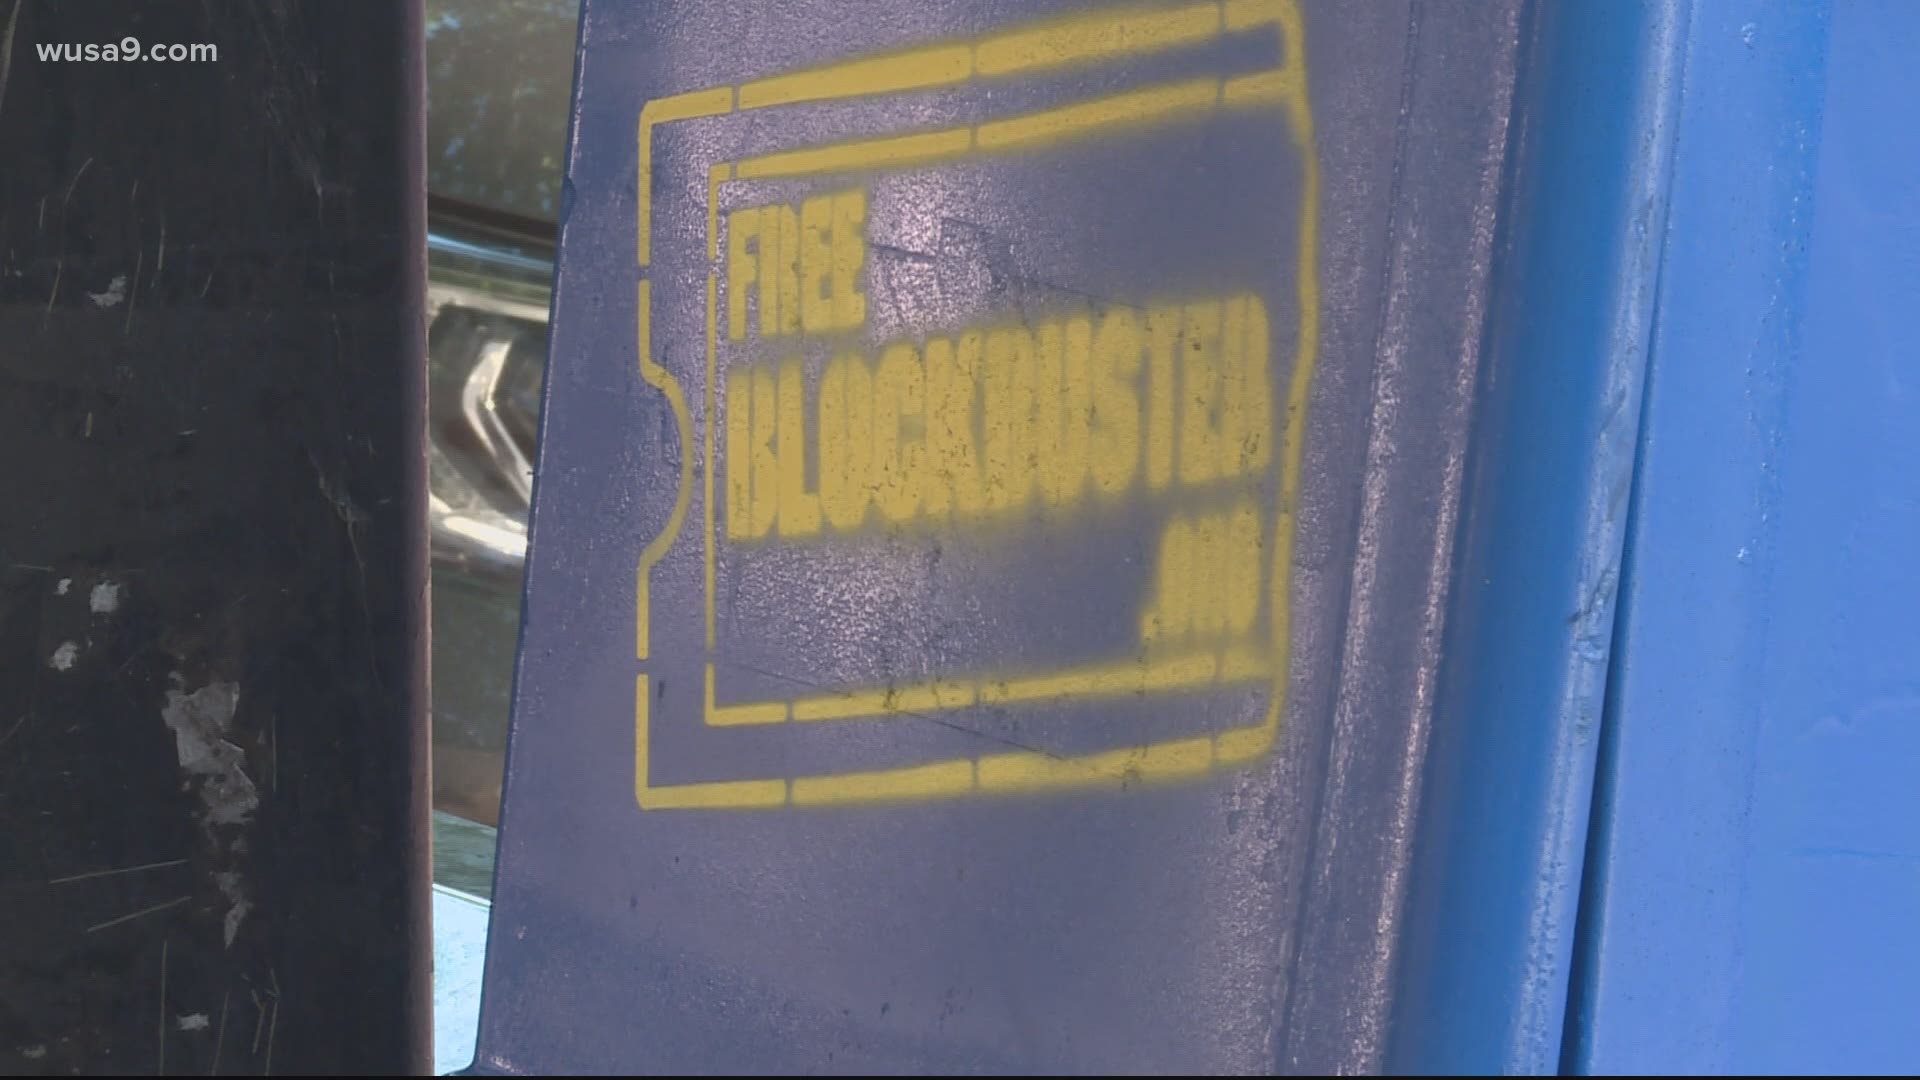 A movie fan in Alexandria has built "Blockbuster boxes" so others can watch free movies during the pandemic.